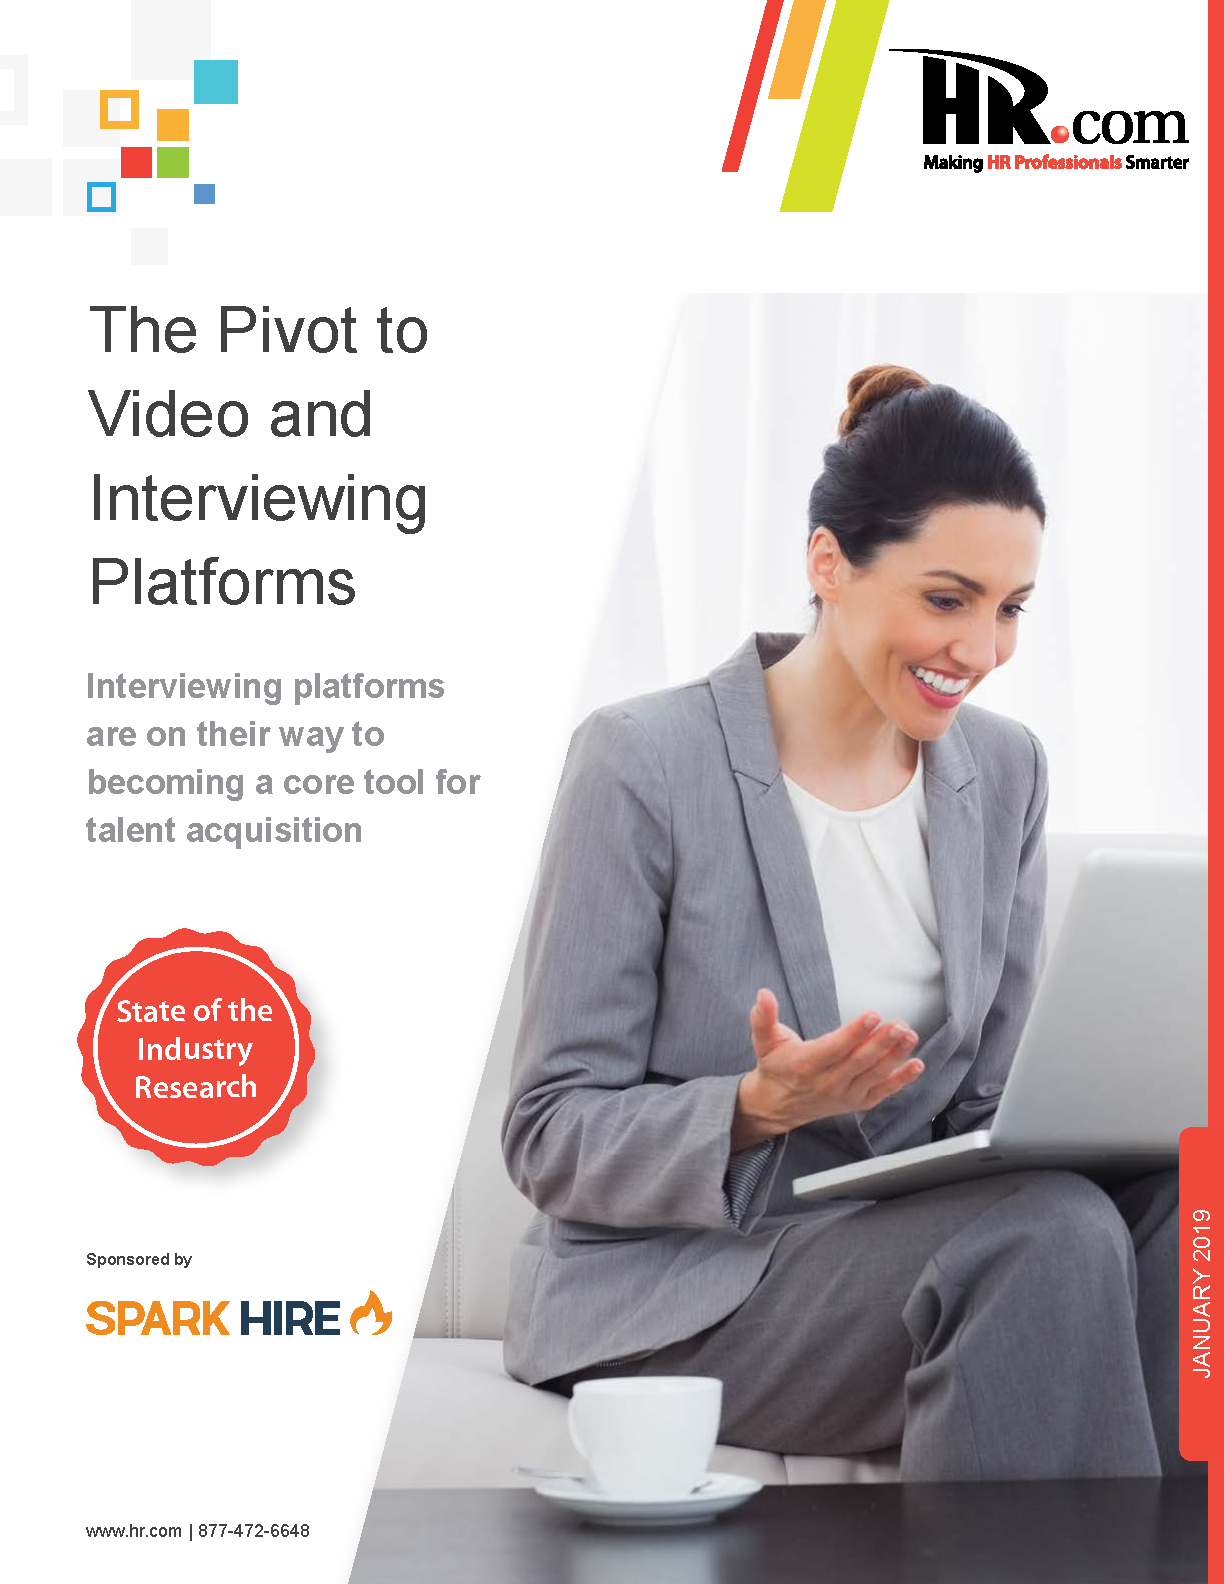 The Pivot to Video and Interviewing Platforms